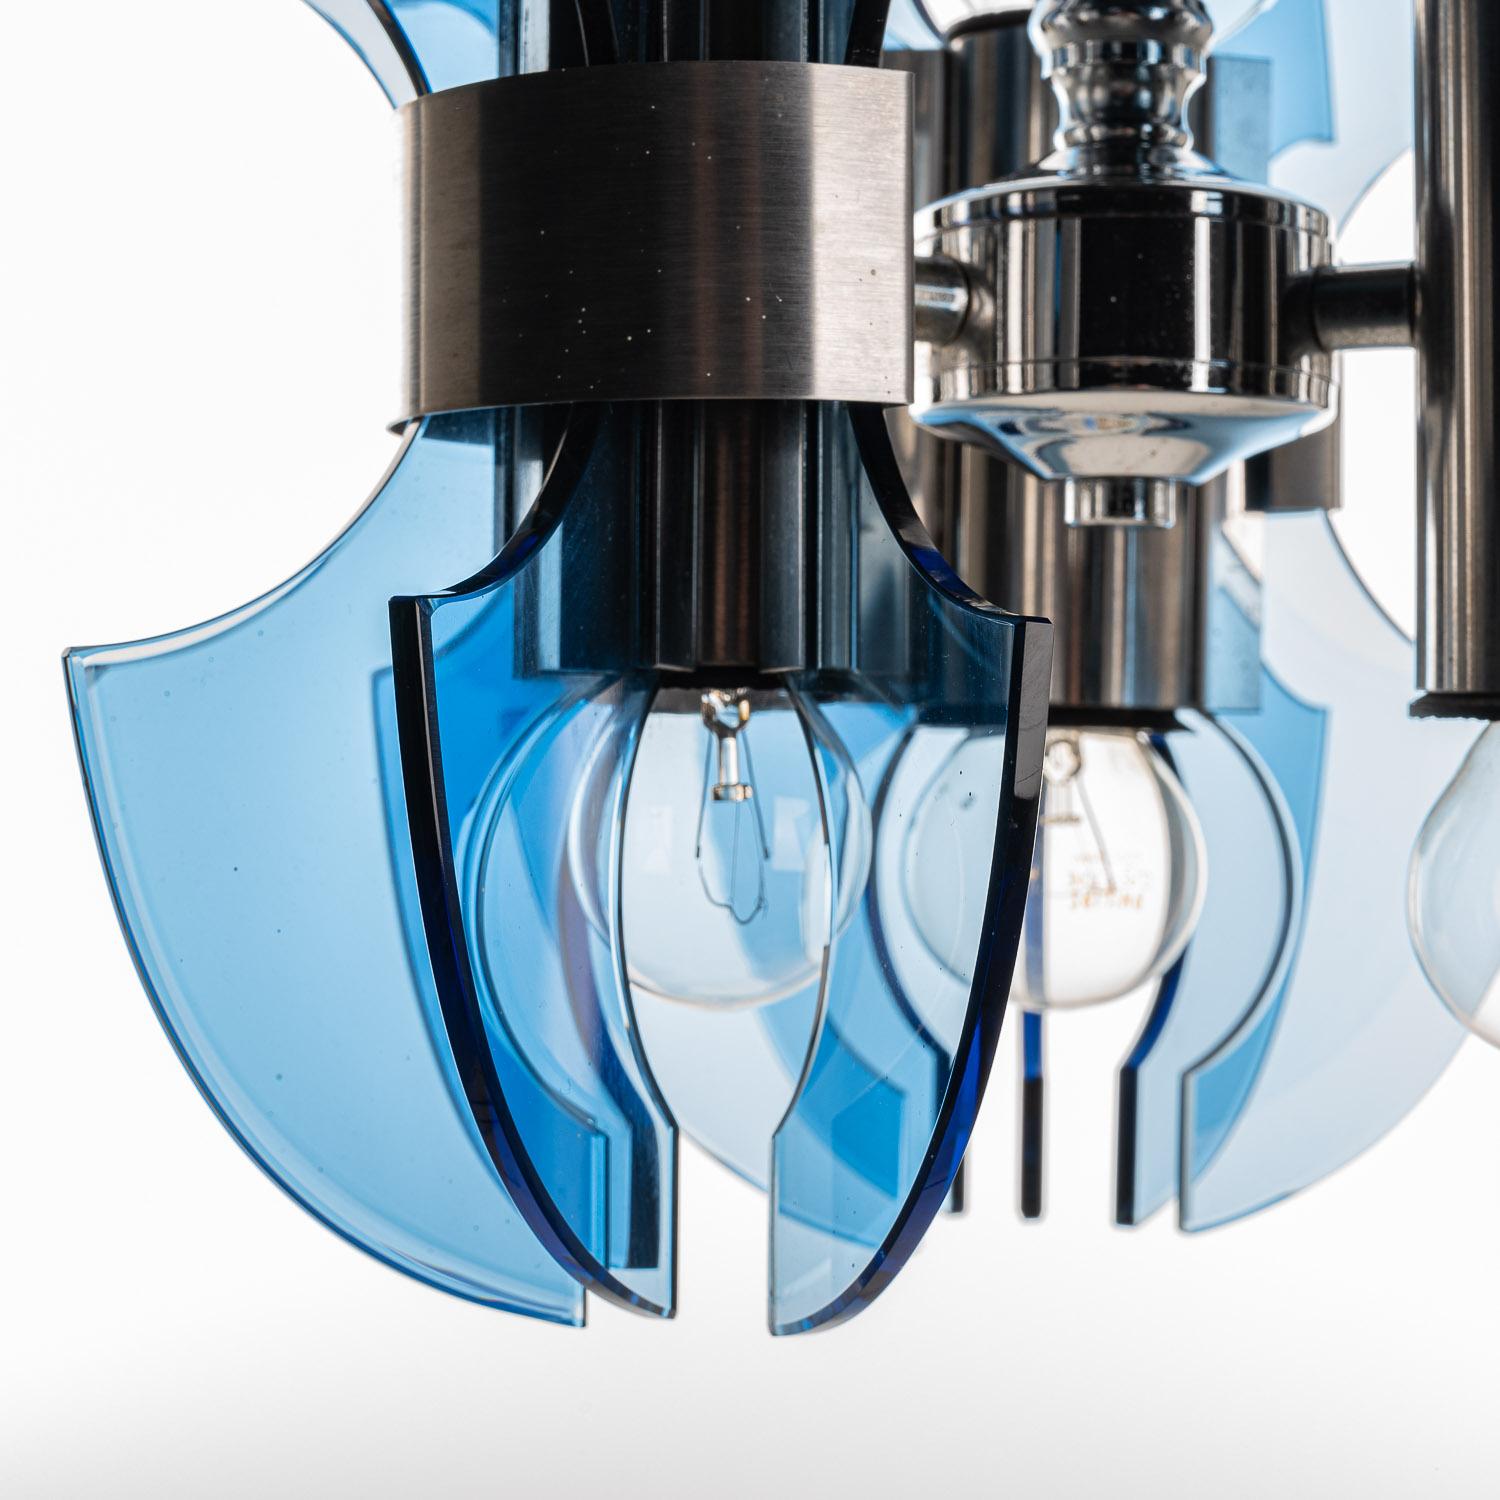 This striking piece of '70s design is sure to catch the eye with its Retro charm. Distinctive blue-tinted glass plates surround the six E14-sized bulbs, held in place by chrome collars. In turn, these connect to a chrome body housing the connecting